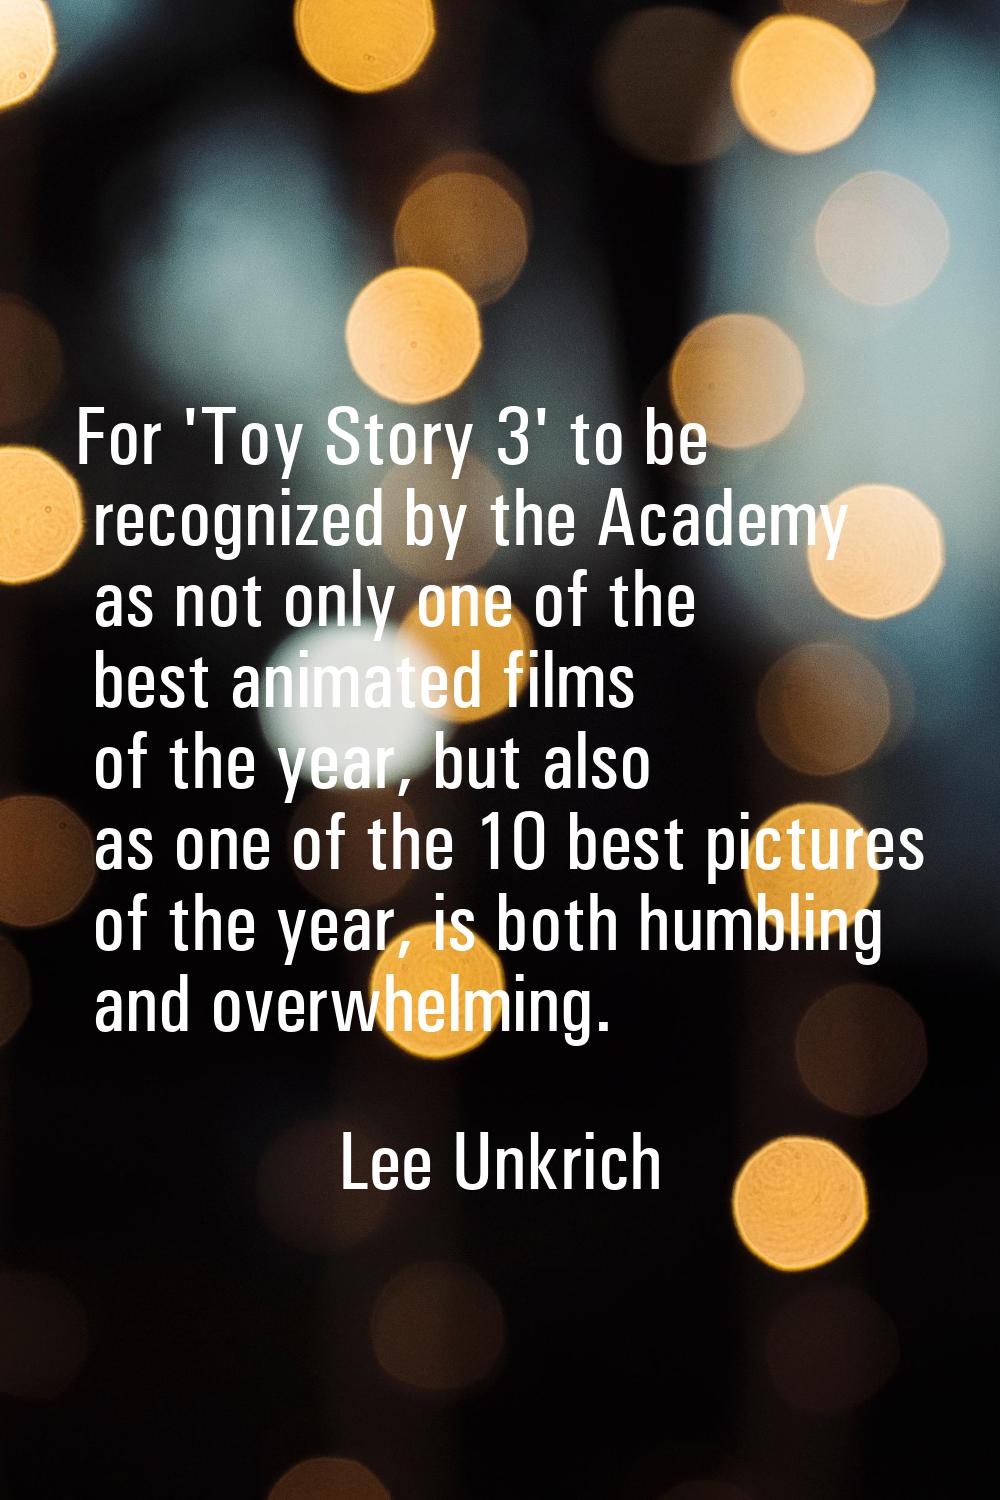 For 'Toy Story 3' to be recognized by the Academy as not only one of the best animated films of the